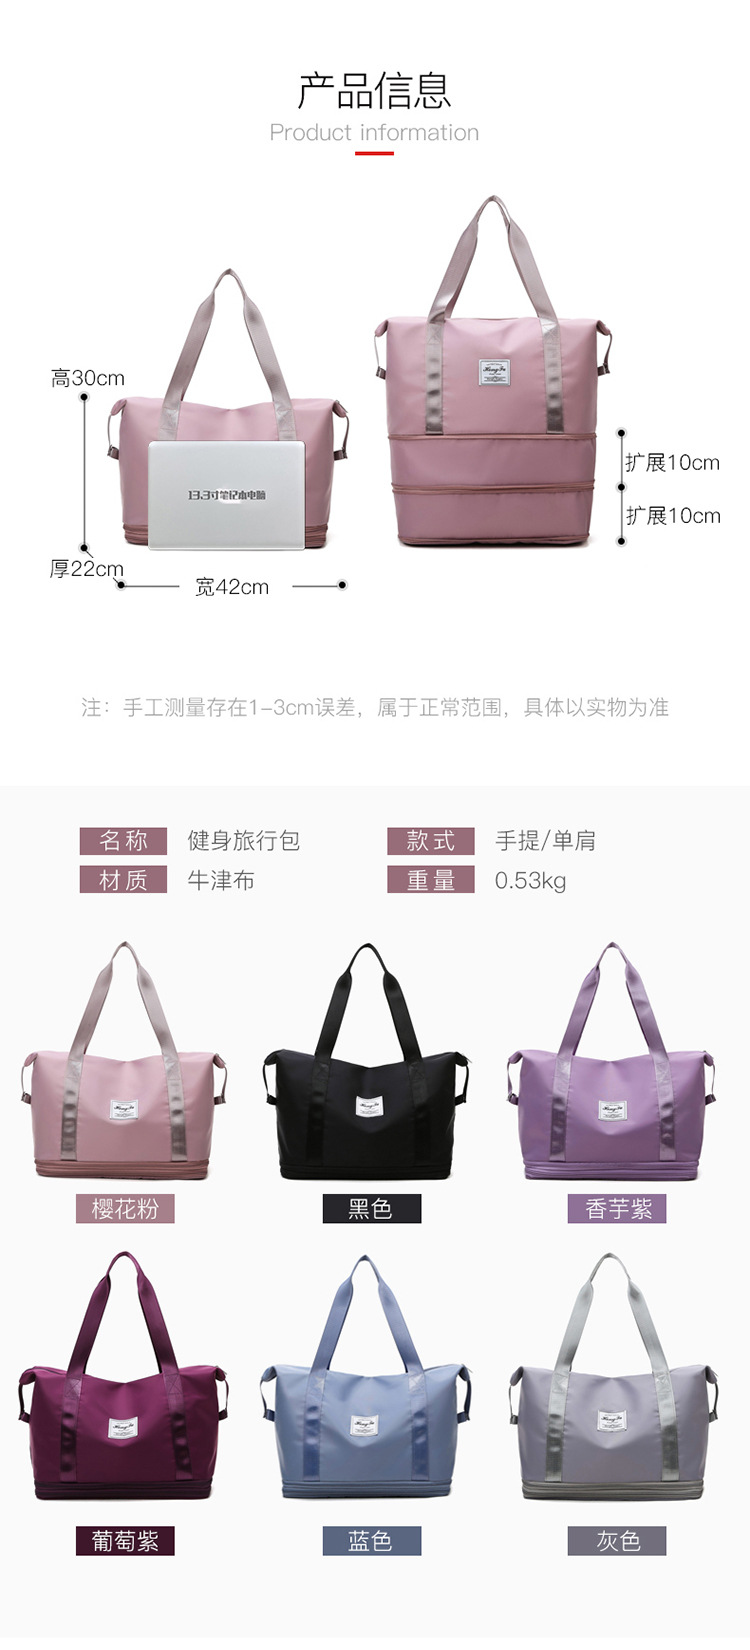 Wholesale ShortDistance Travel Bag Portable LargeCapacity Luggage Bag Business Trip Pending Delivery Travel Storage Travel Bag Can Be Customized Logopicture30